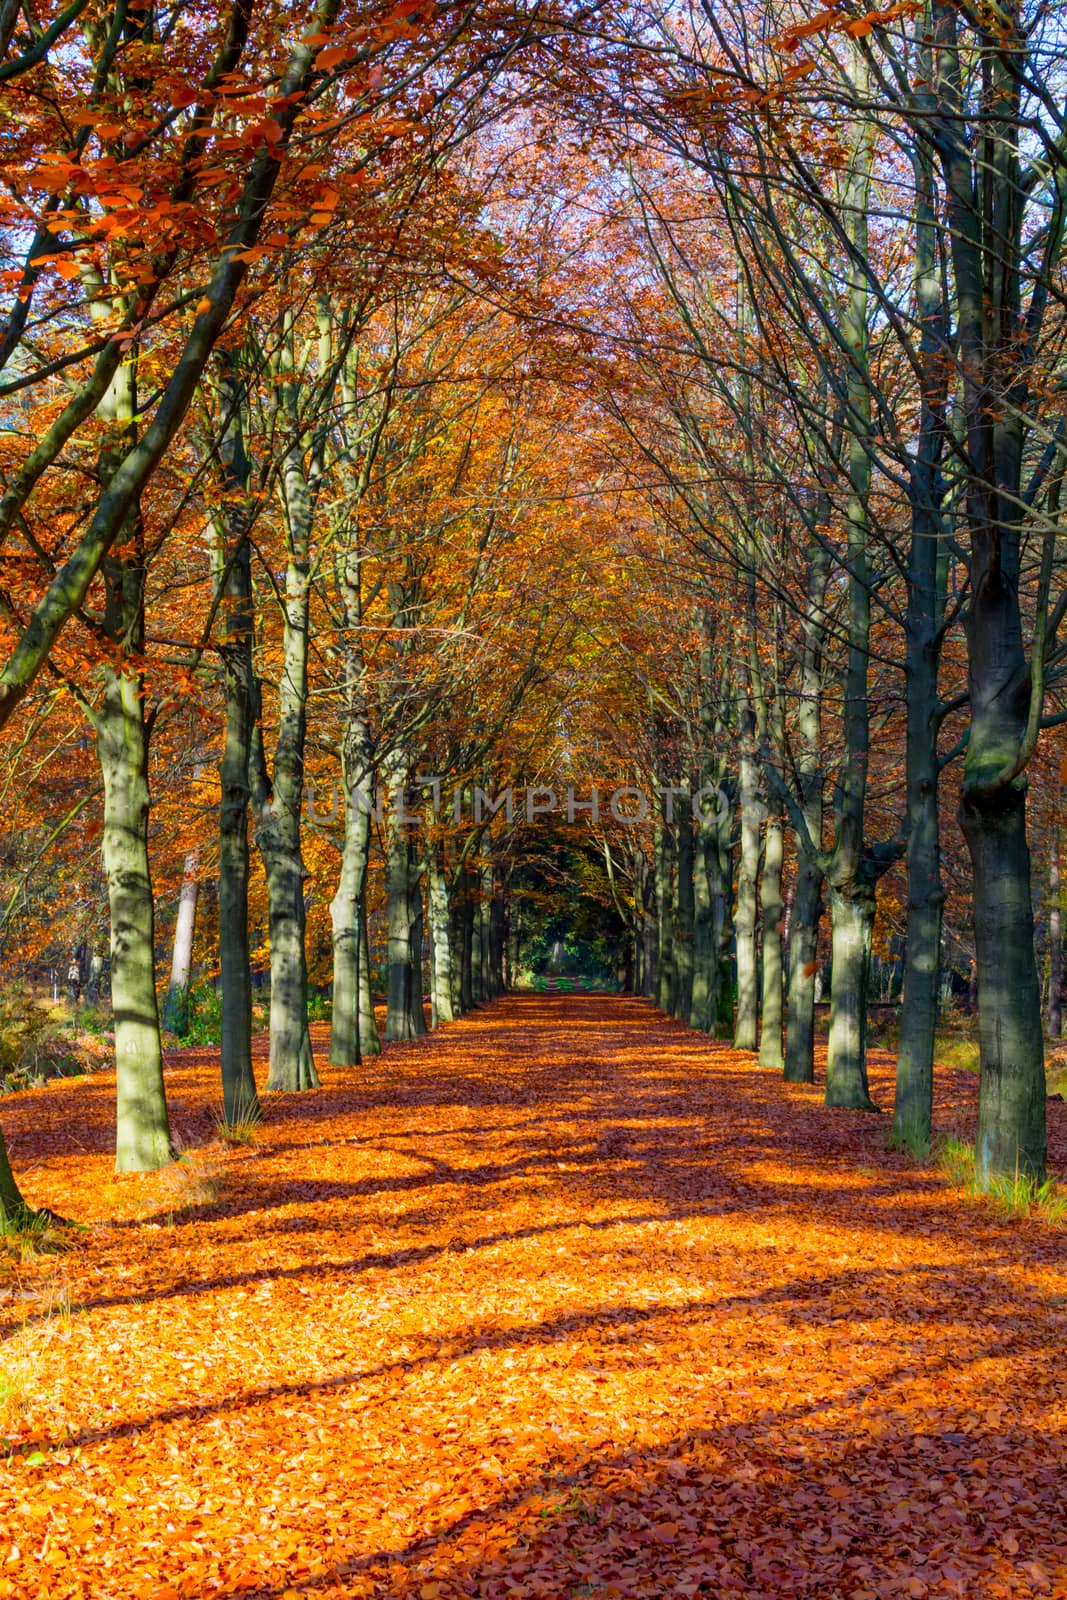 Autumn avenue, leaves on the ground, with trees lined up on a sunny day. Beauty in nature and seasons. by kb79